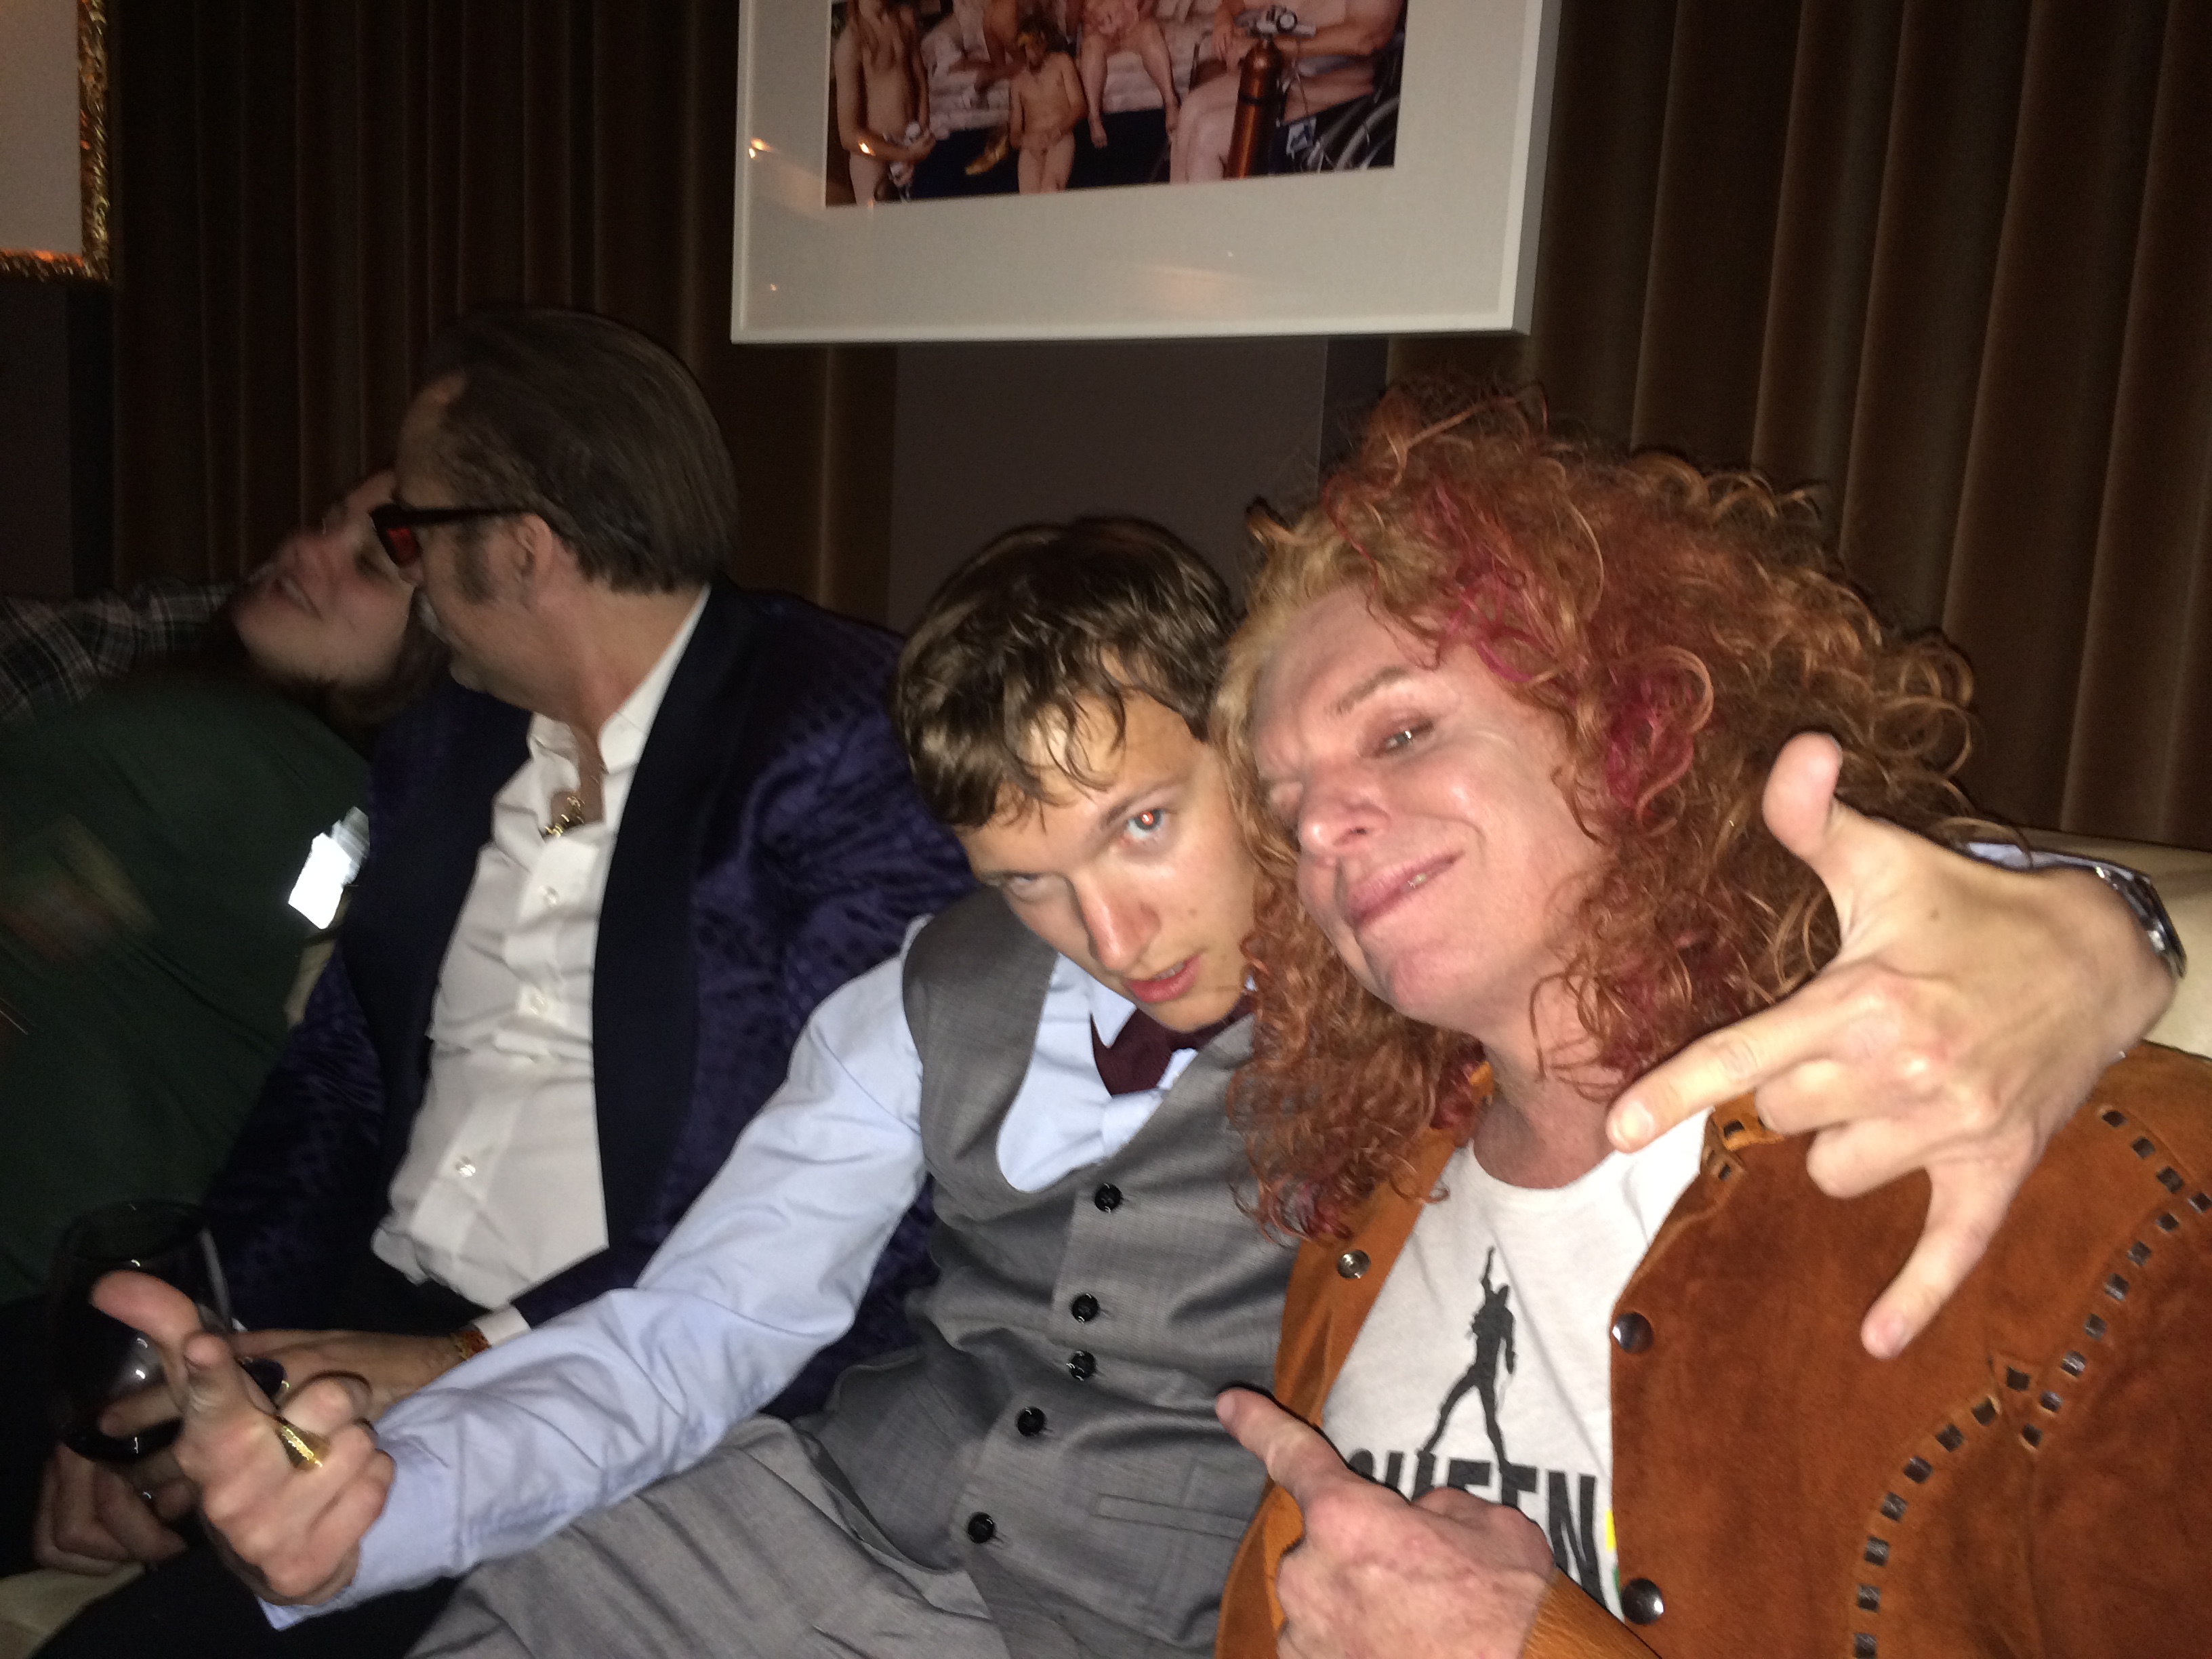 Carrot Top and Joey Bell